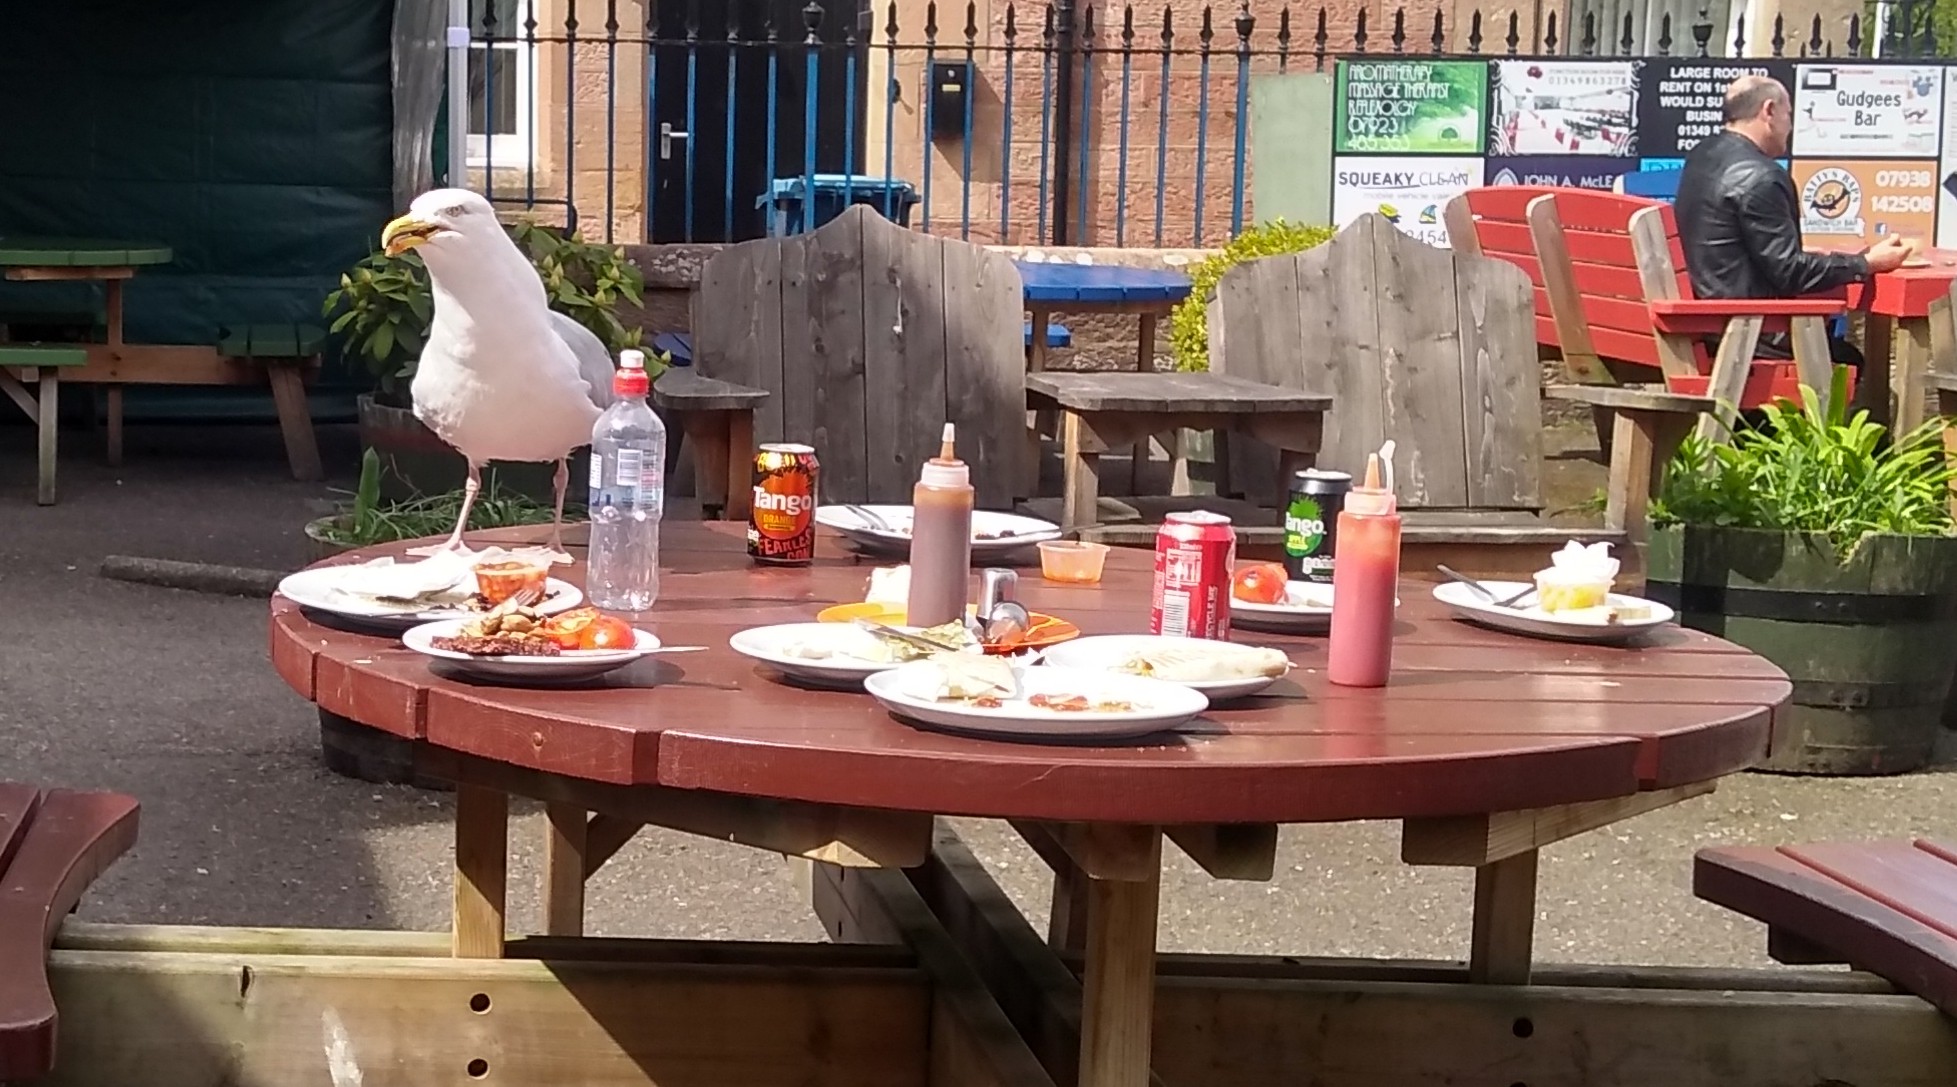 Picnic table with food leftovers and seagull